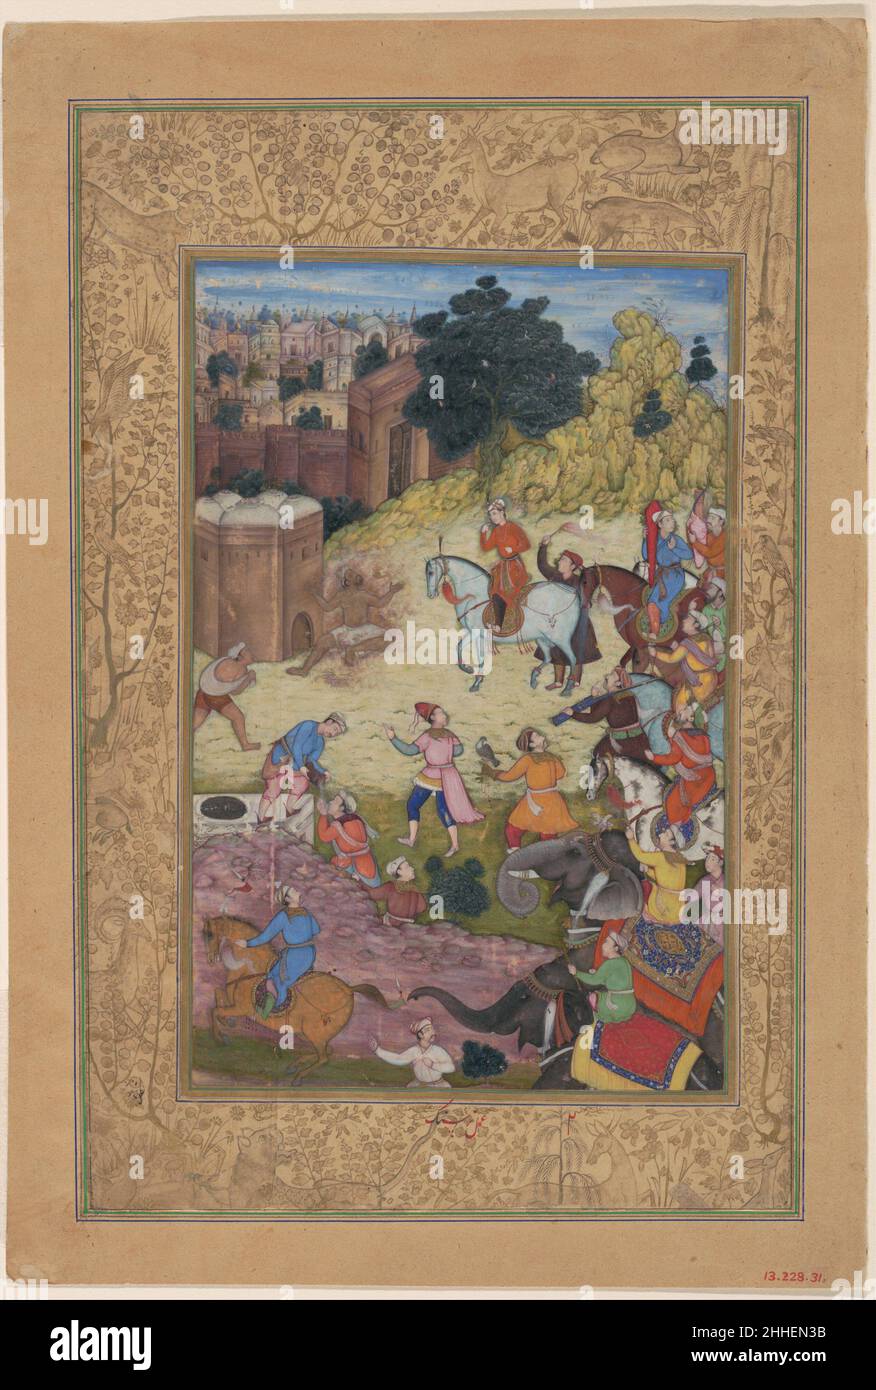 'A Bathhouse Keeper is Consumed by Passion for his Beloved', Folio from a Khamsa (Quintet) of Amir Khusrau Dihlavi 1597–98 Amir Khusrau Dihlavi Matla’ al-Anwar (Rising of the Luminaries), the first poem of Amir Khusrau Dihlavi’s Quintet, is comprised of 3310 verses compiled approximately in twenty Maqalat (didactic discourses). Matla’ al-Anwar is a response by Amir Khusrau to Nizami Ganjavi’s Makhzan al-Asrar. Painted at Lahore by Nar sing, this painting shows a bathhouse keeper who falls in love when he sees the king on his visit with his retinue. Attention gained by the King, stokes the heat Stock Photo